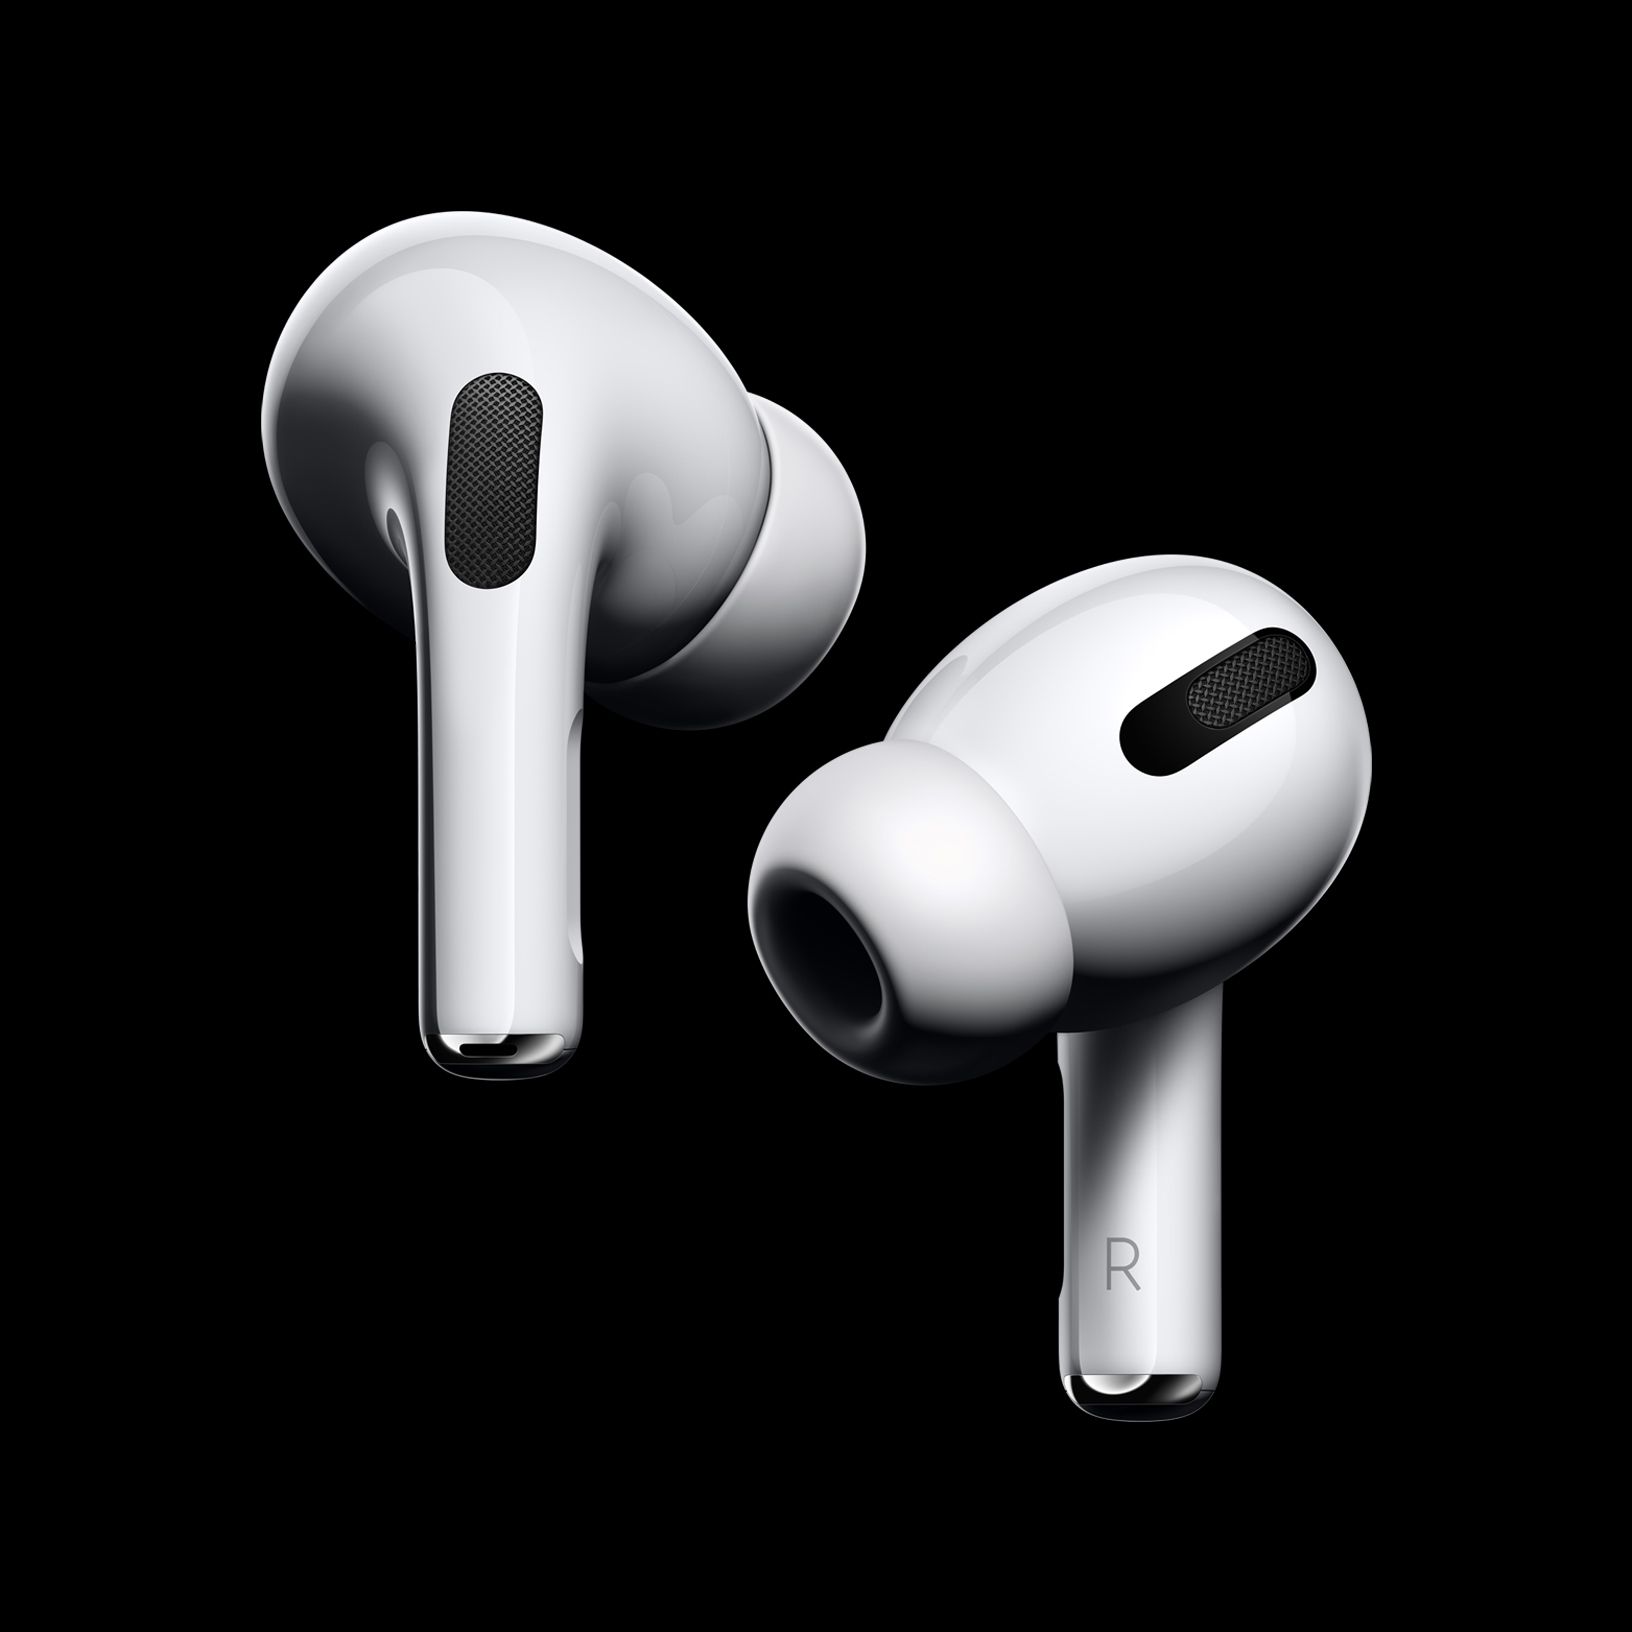 What You Need to Know About the Apple AirPods Pro